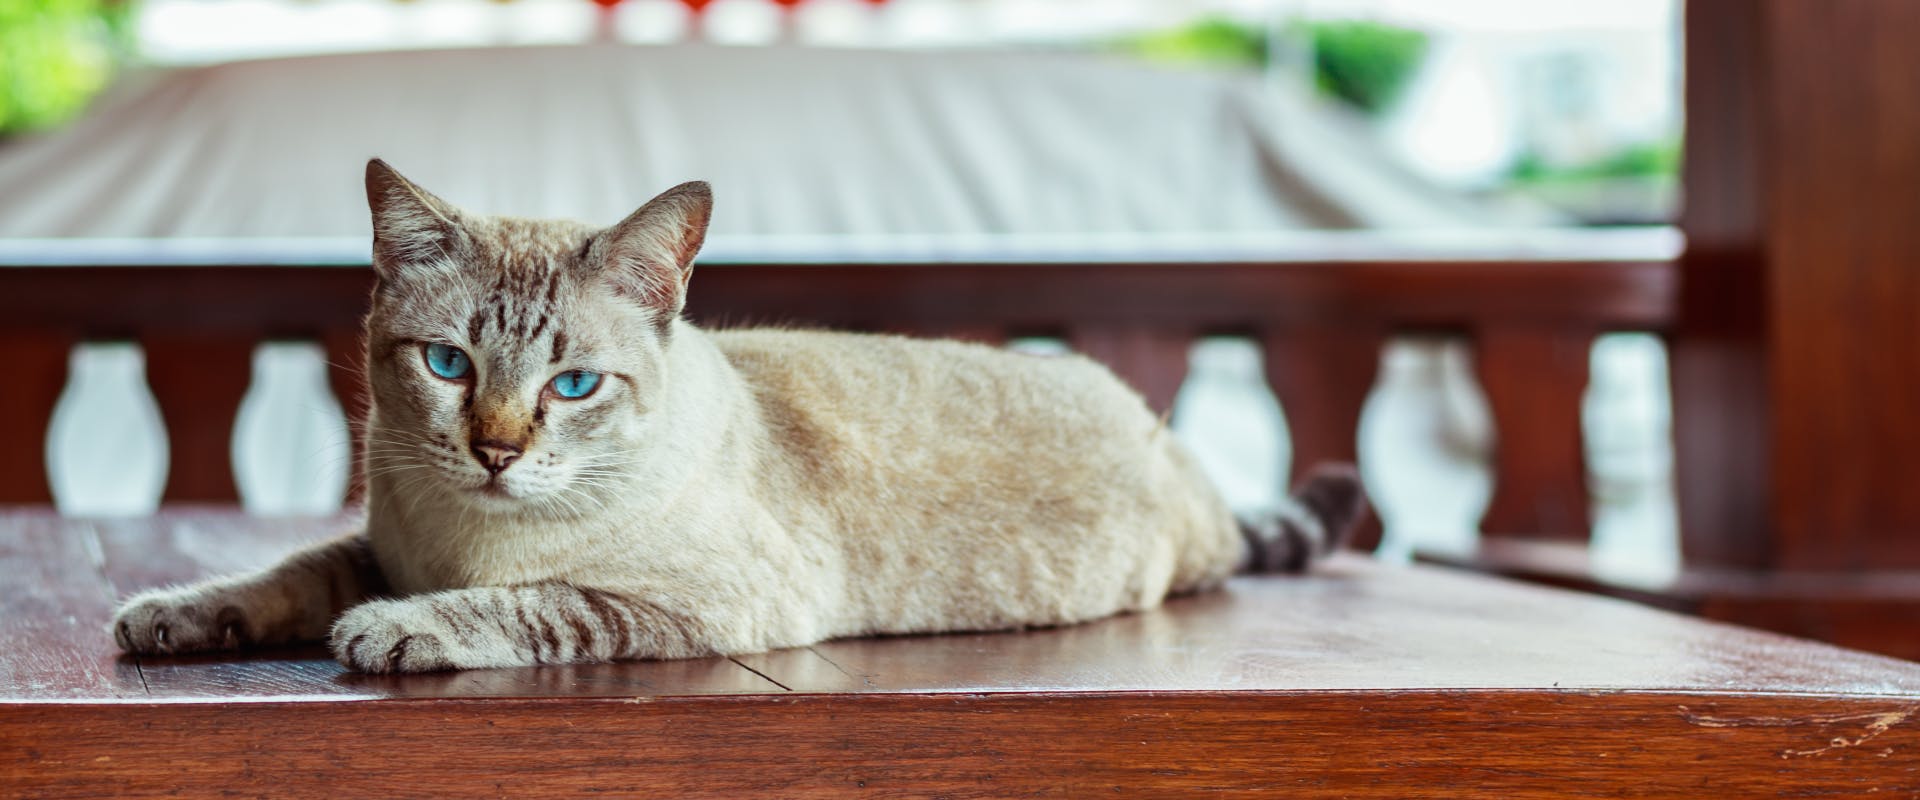 a short haired cat with bright blue eyes reclining on a wooden table on a balcony